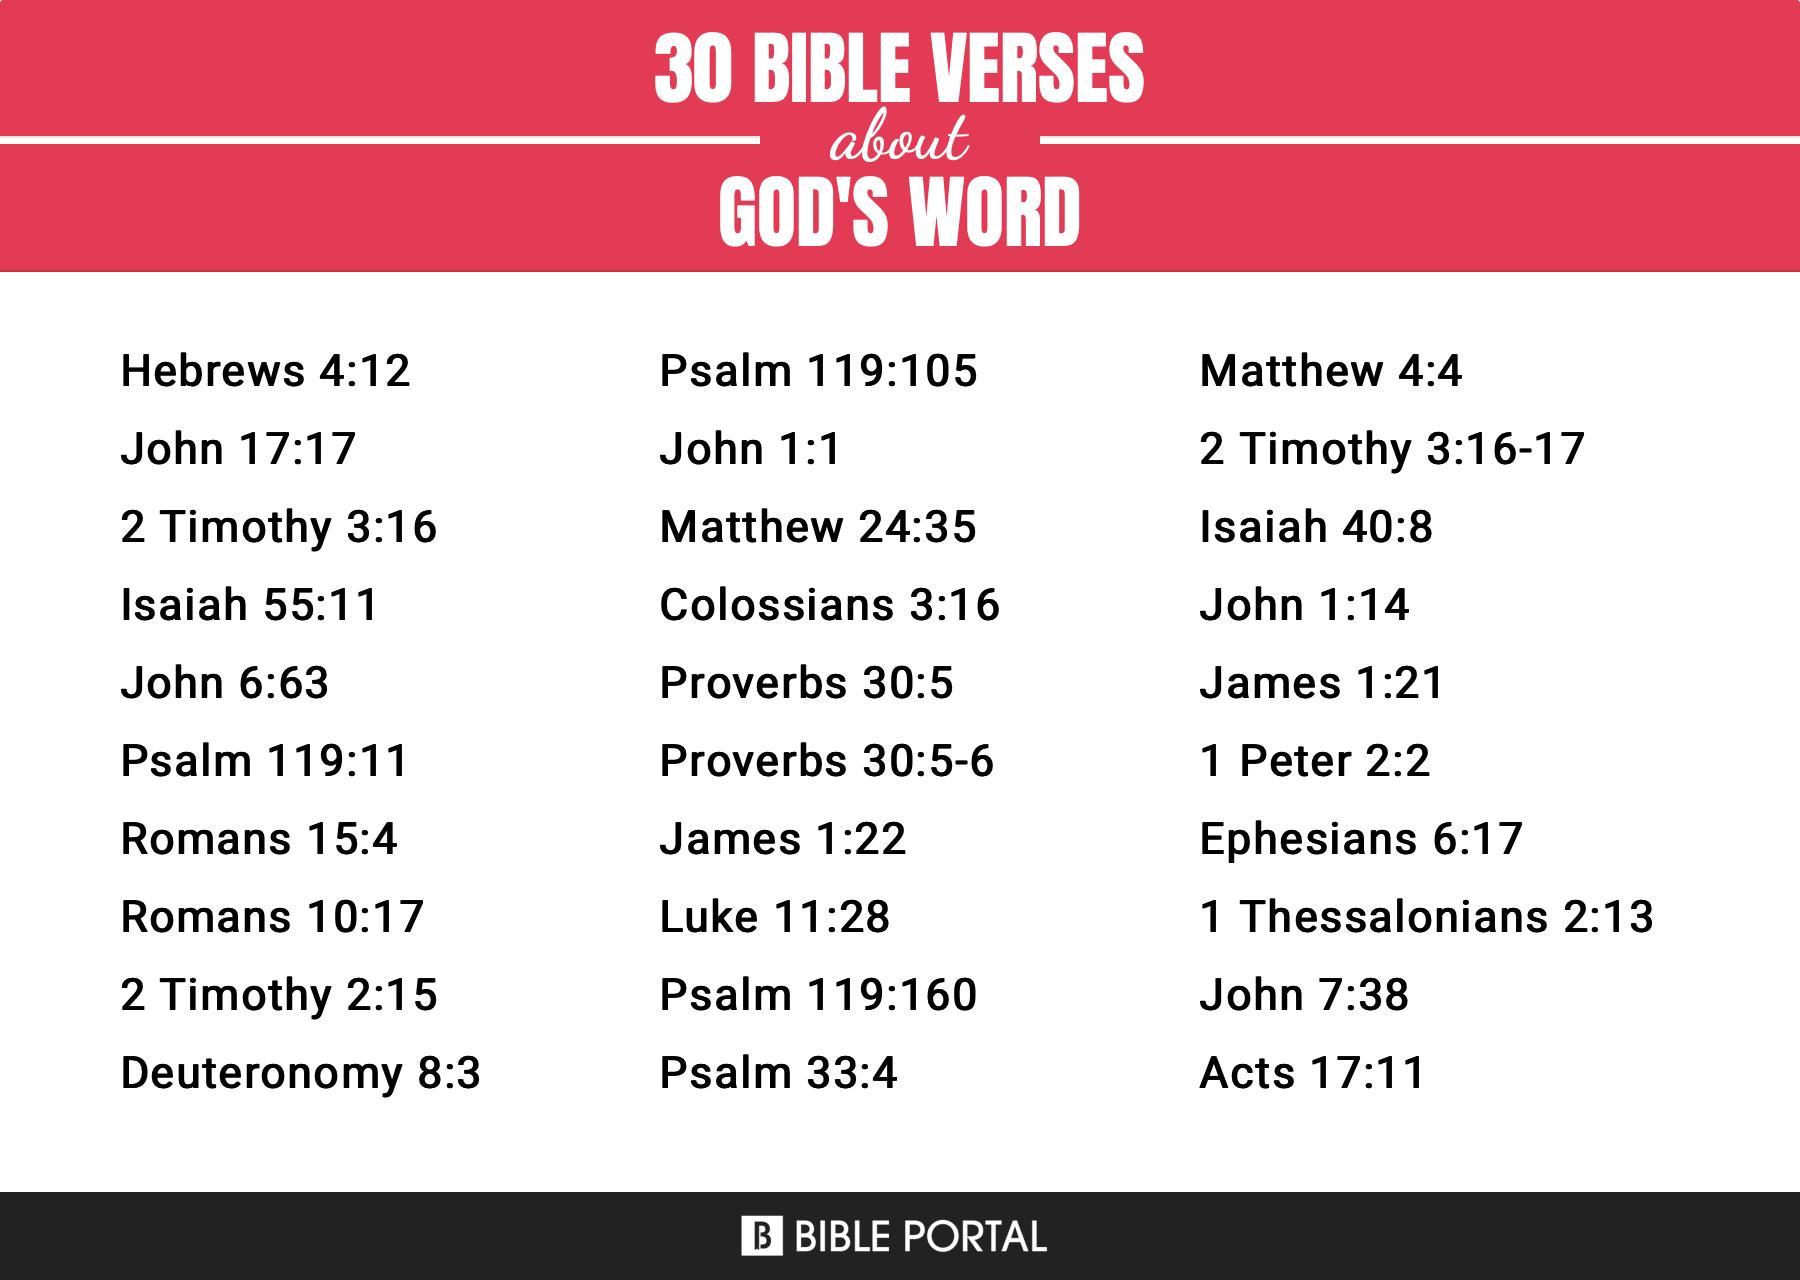 What Does the Bible Say about God's Word?